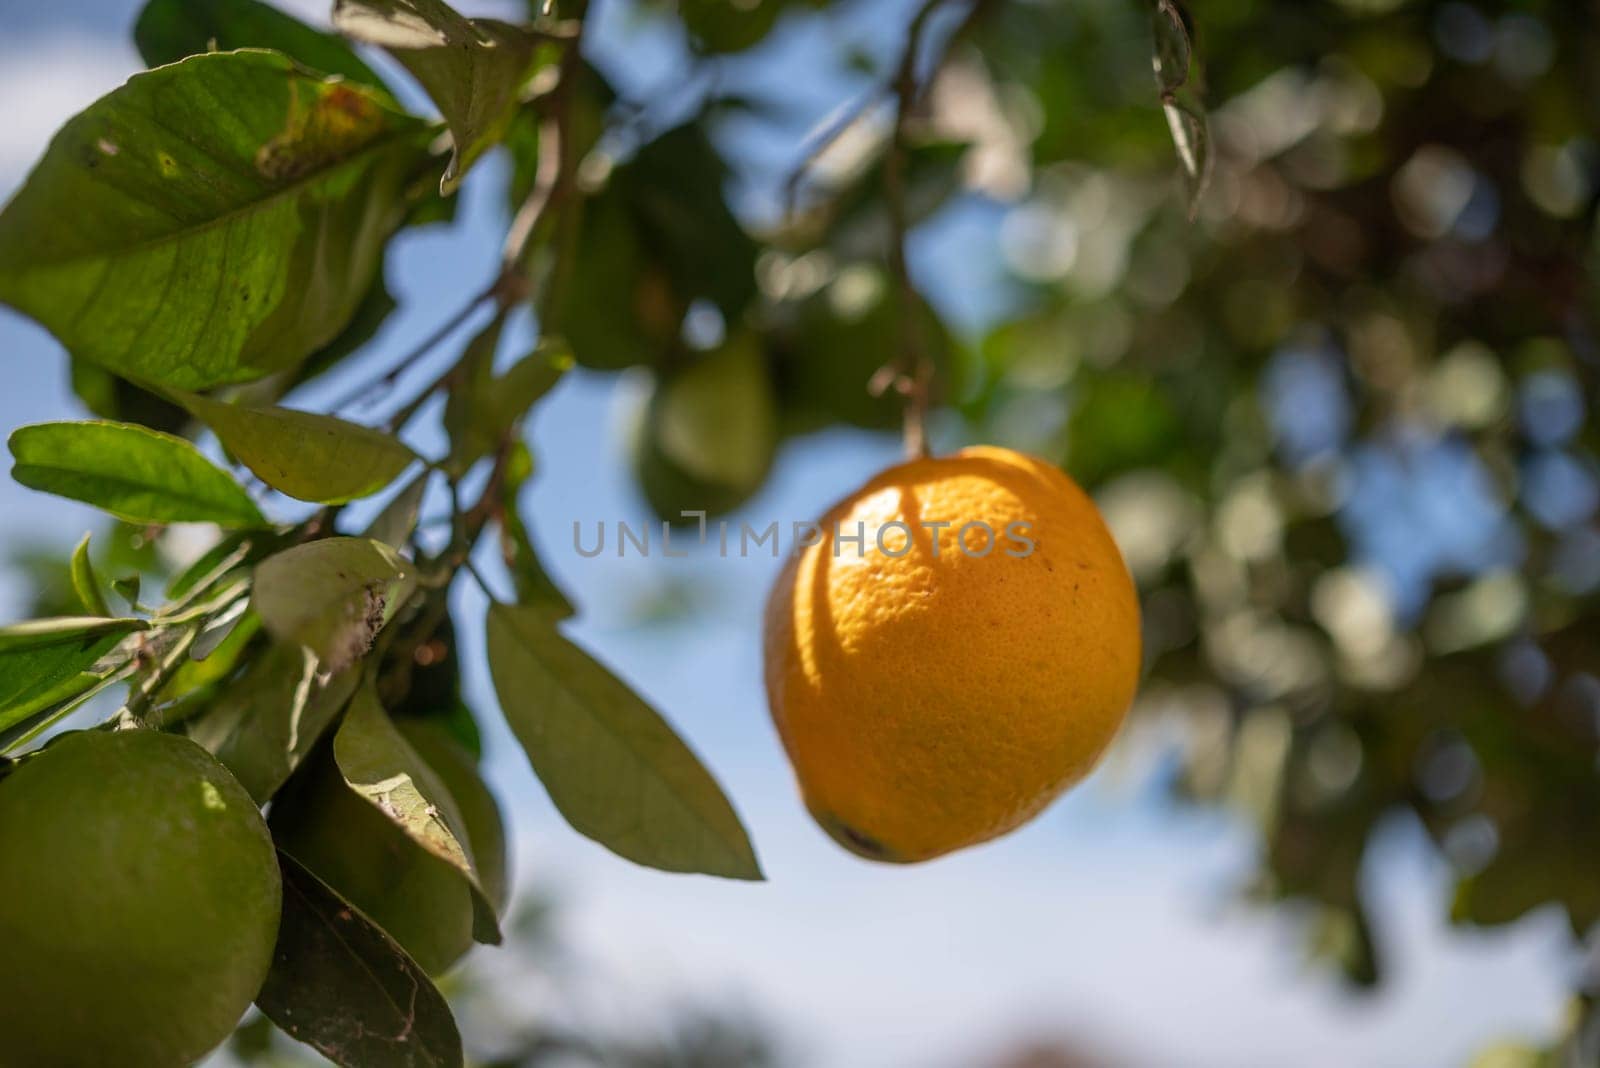 A yellow lemon growing on a tree among green lemons and leaves. Ripe Citrus fruit on blue sky and green leaves background on a sunny day. Concept of organic farming and harvest. Nature wallpaper